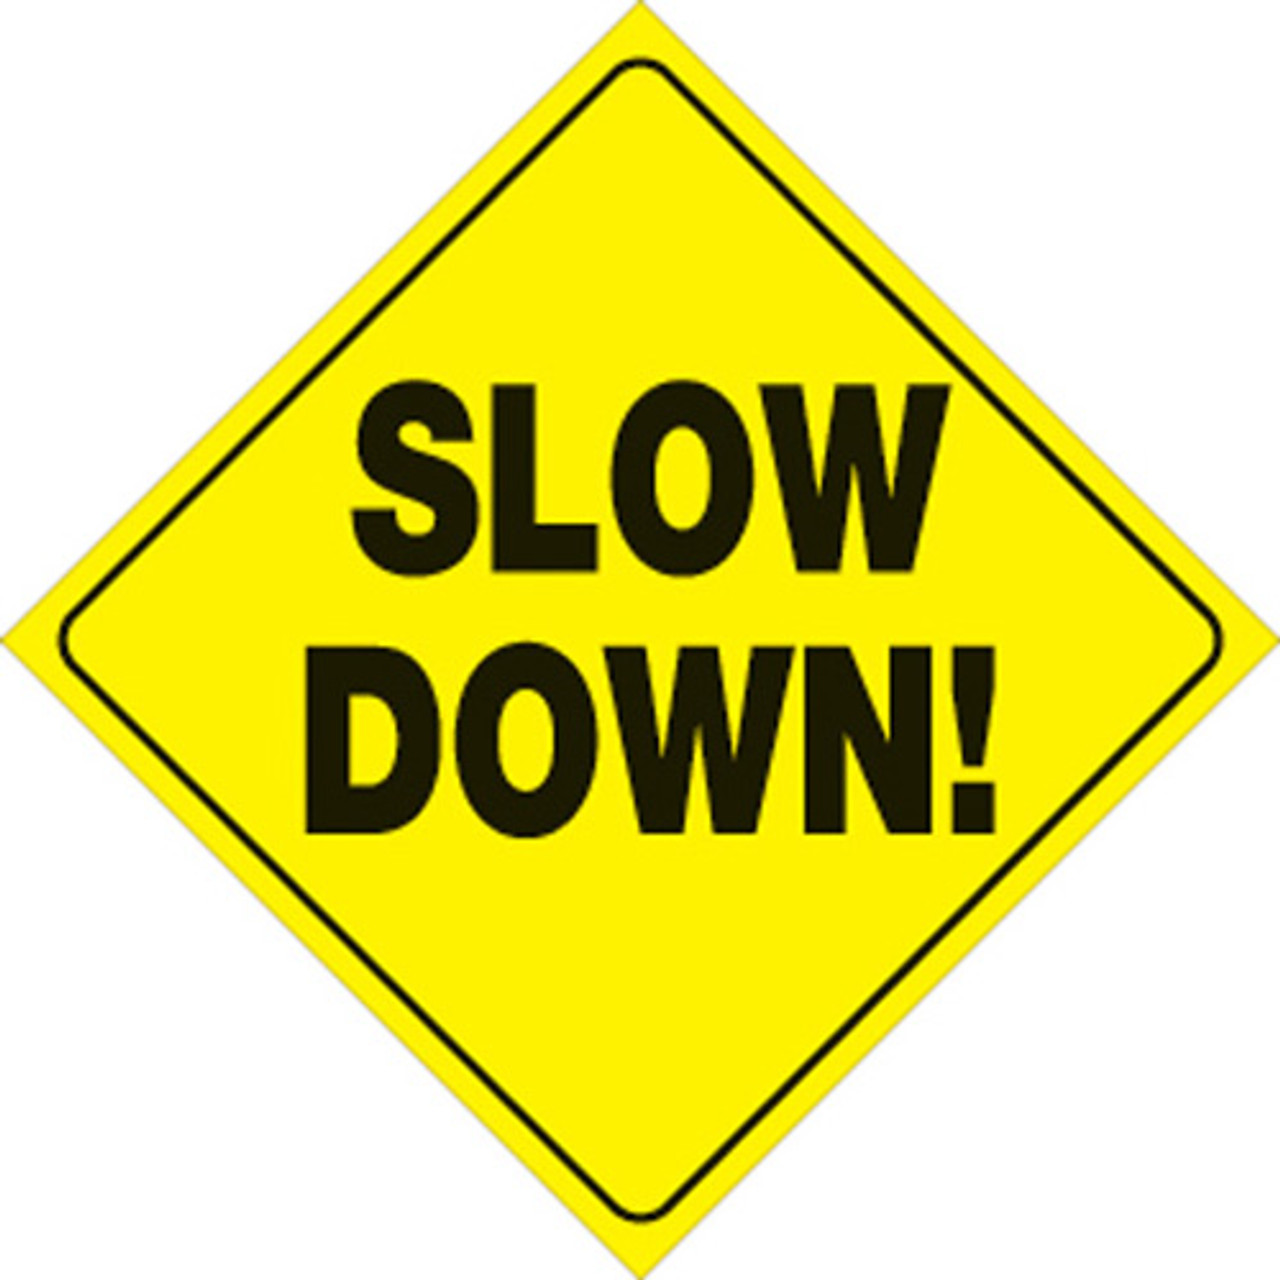 Sign down. Slow down. Slow down знак. Down sign. Sign down PNG.